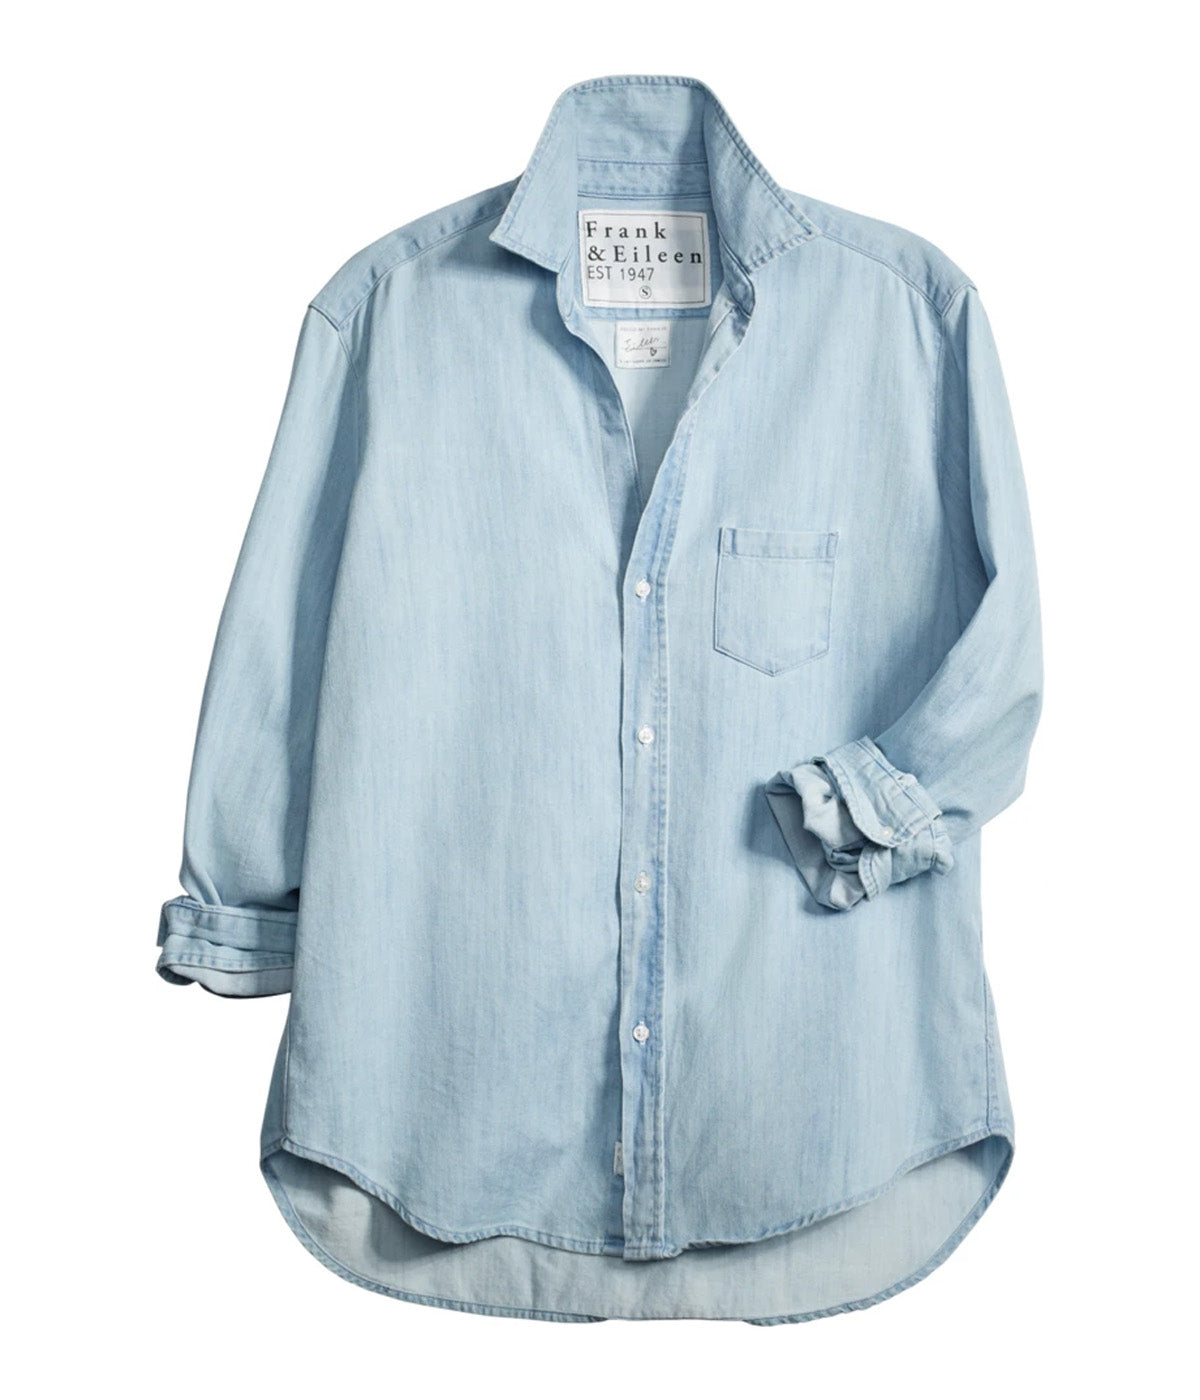 Eileen Woven Denim Button Up in Classic Blue Wash